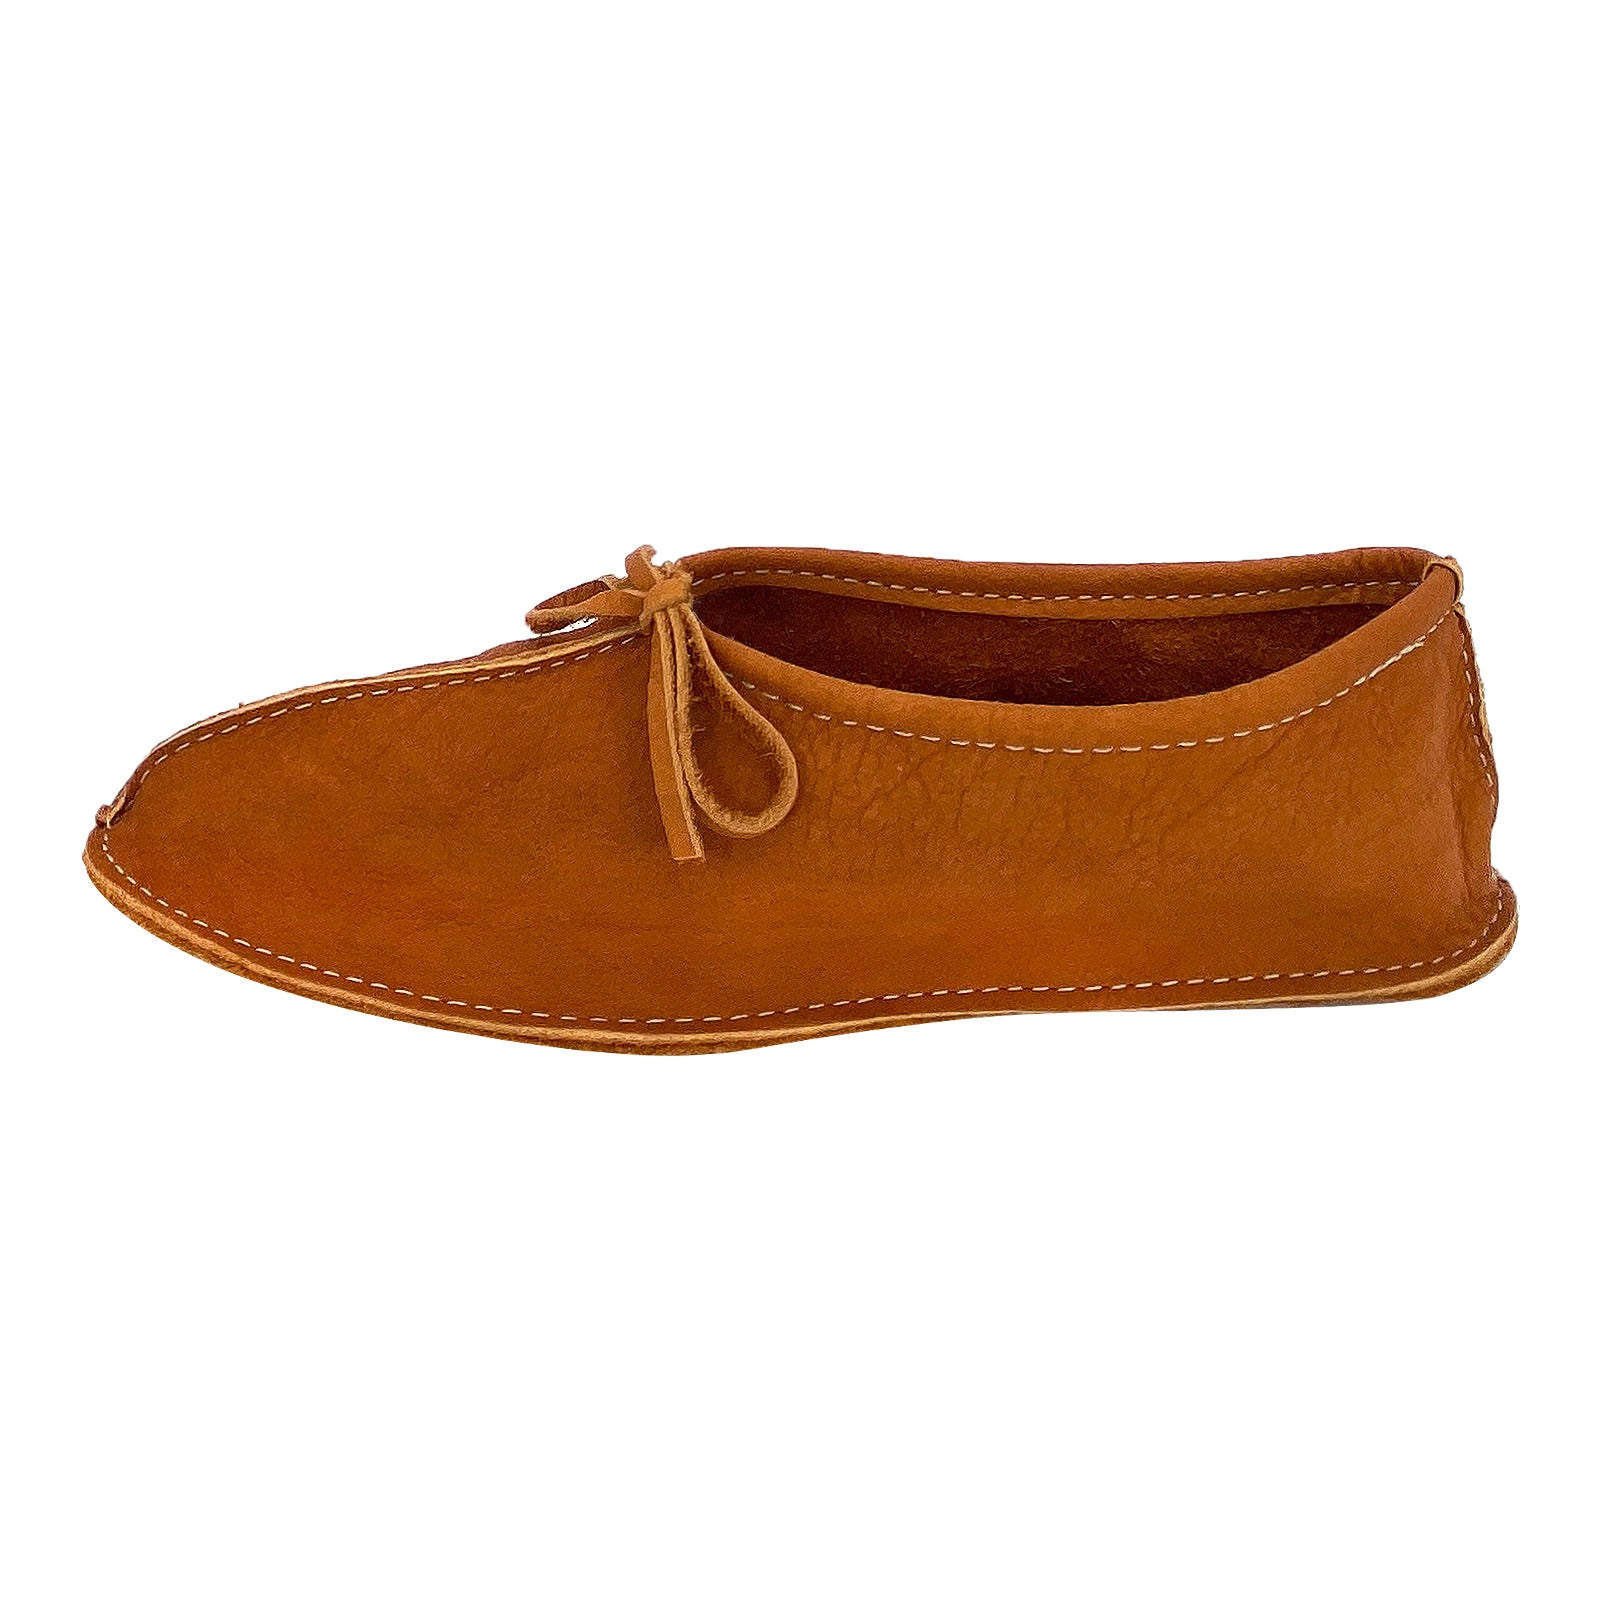 Women's CLEARANCE Buffalo Ballet Moccasins (7 ONLY)